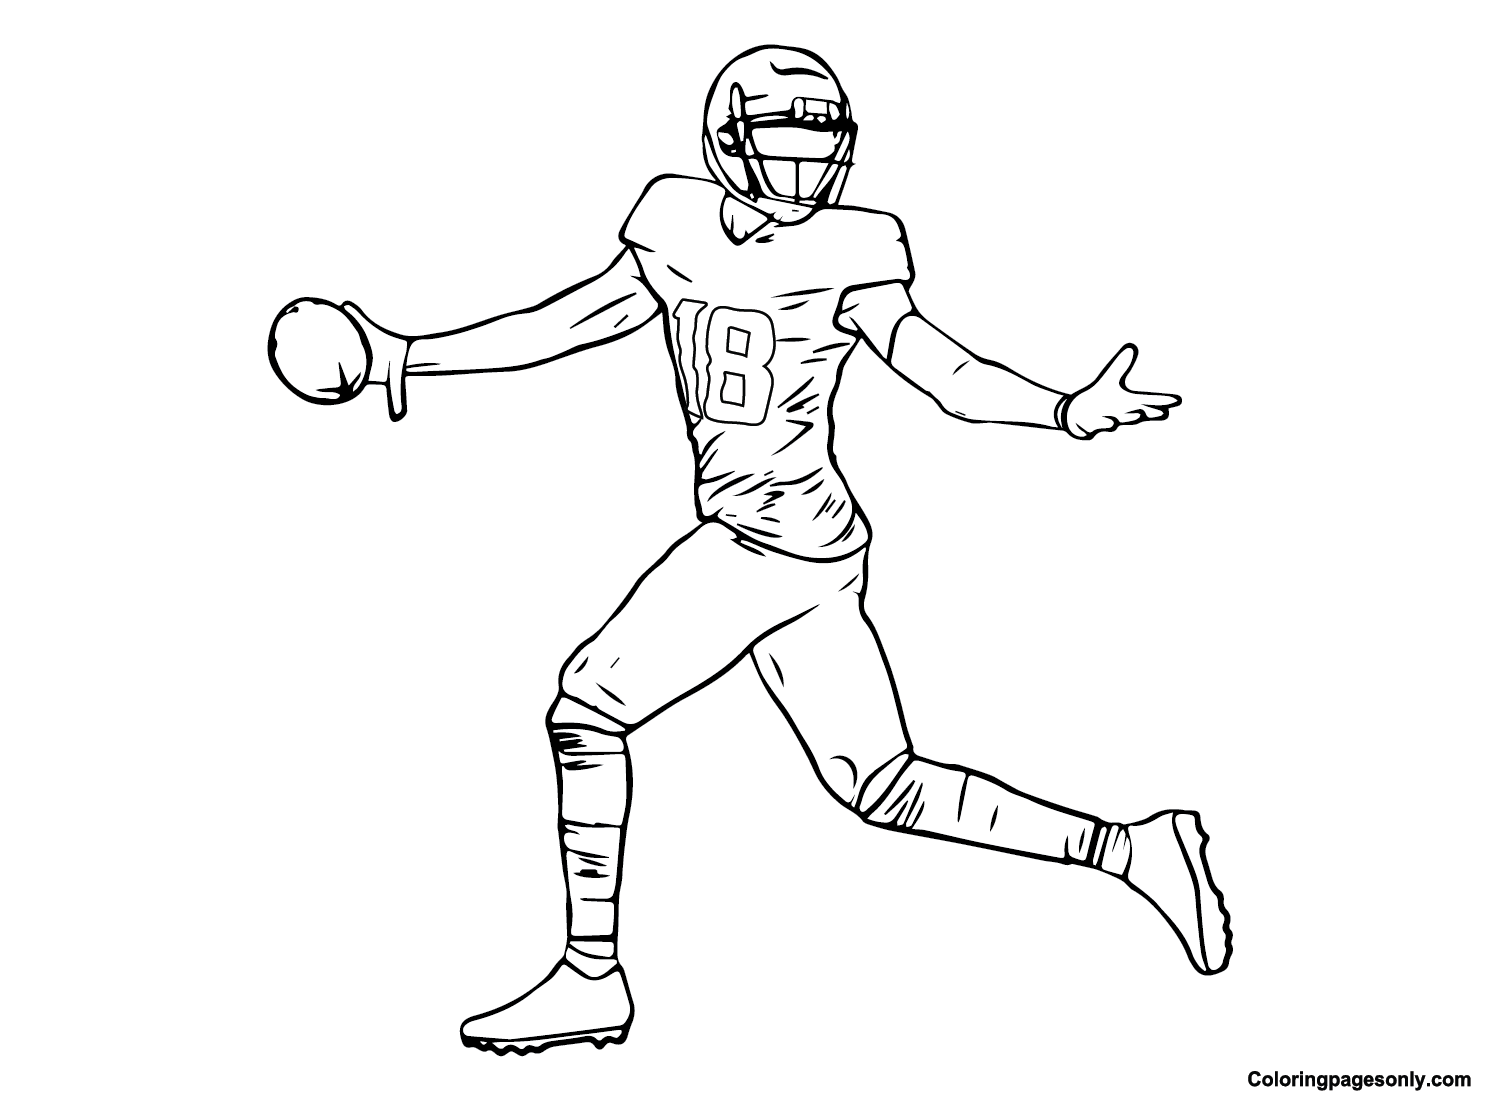 Printable Justin Jefferson Coloring Pages